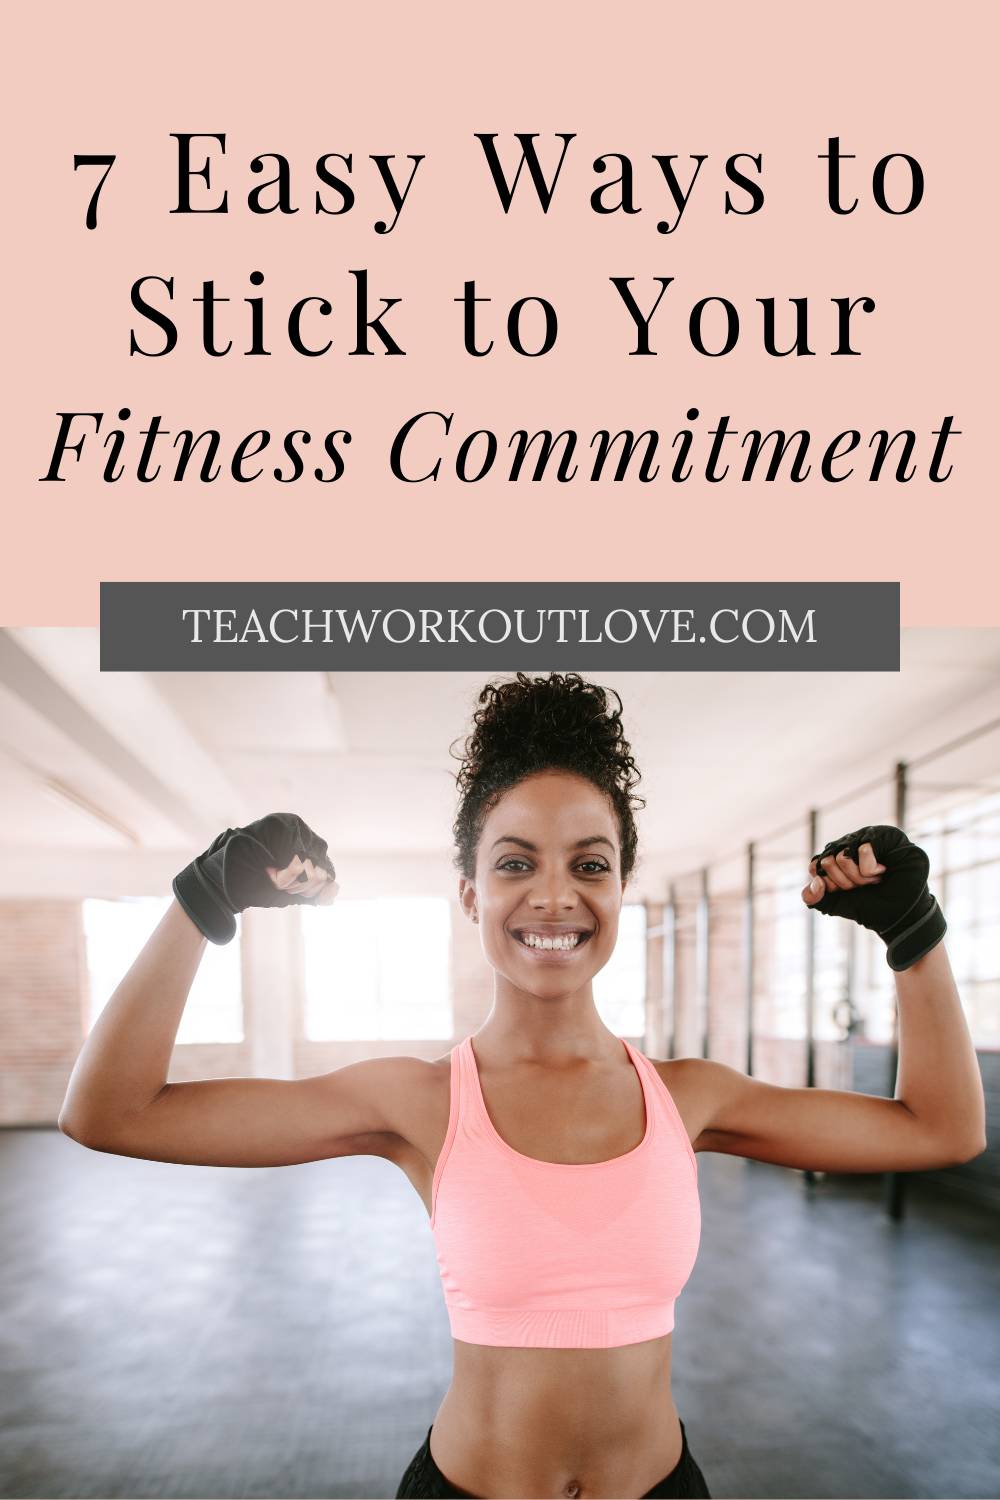 You need something other than motivation to turn your health “kick” into a habit. Here's how to stick to your fitness commitment.